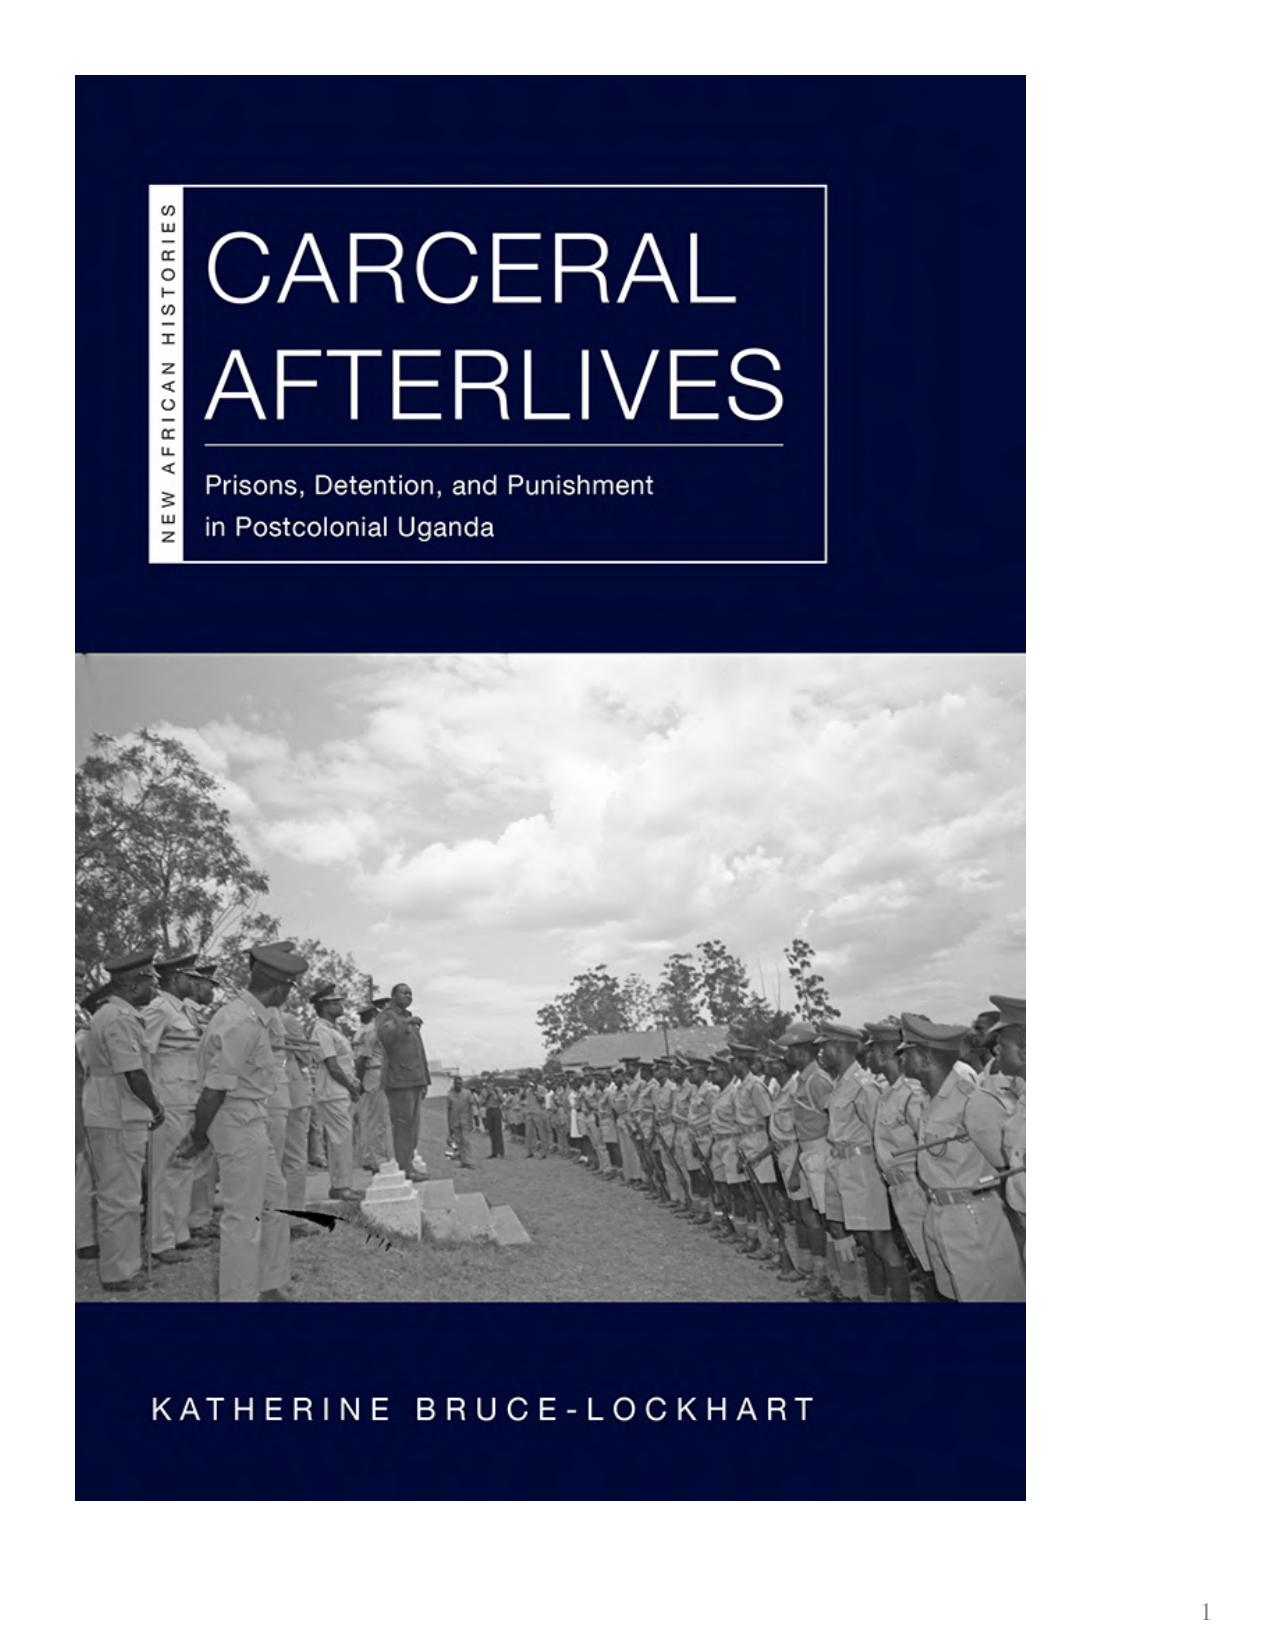 Carceral Afterlives: Prisons, Detention, and Punishment in Postcolonial Uganda by Katherine Bruce-Lockhart